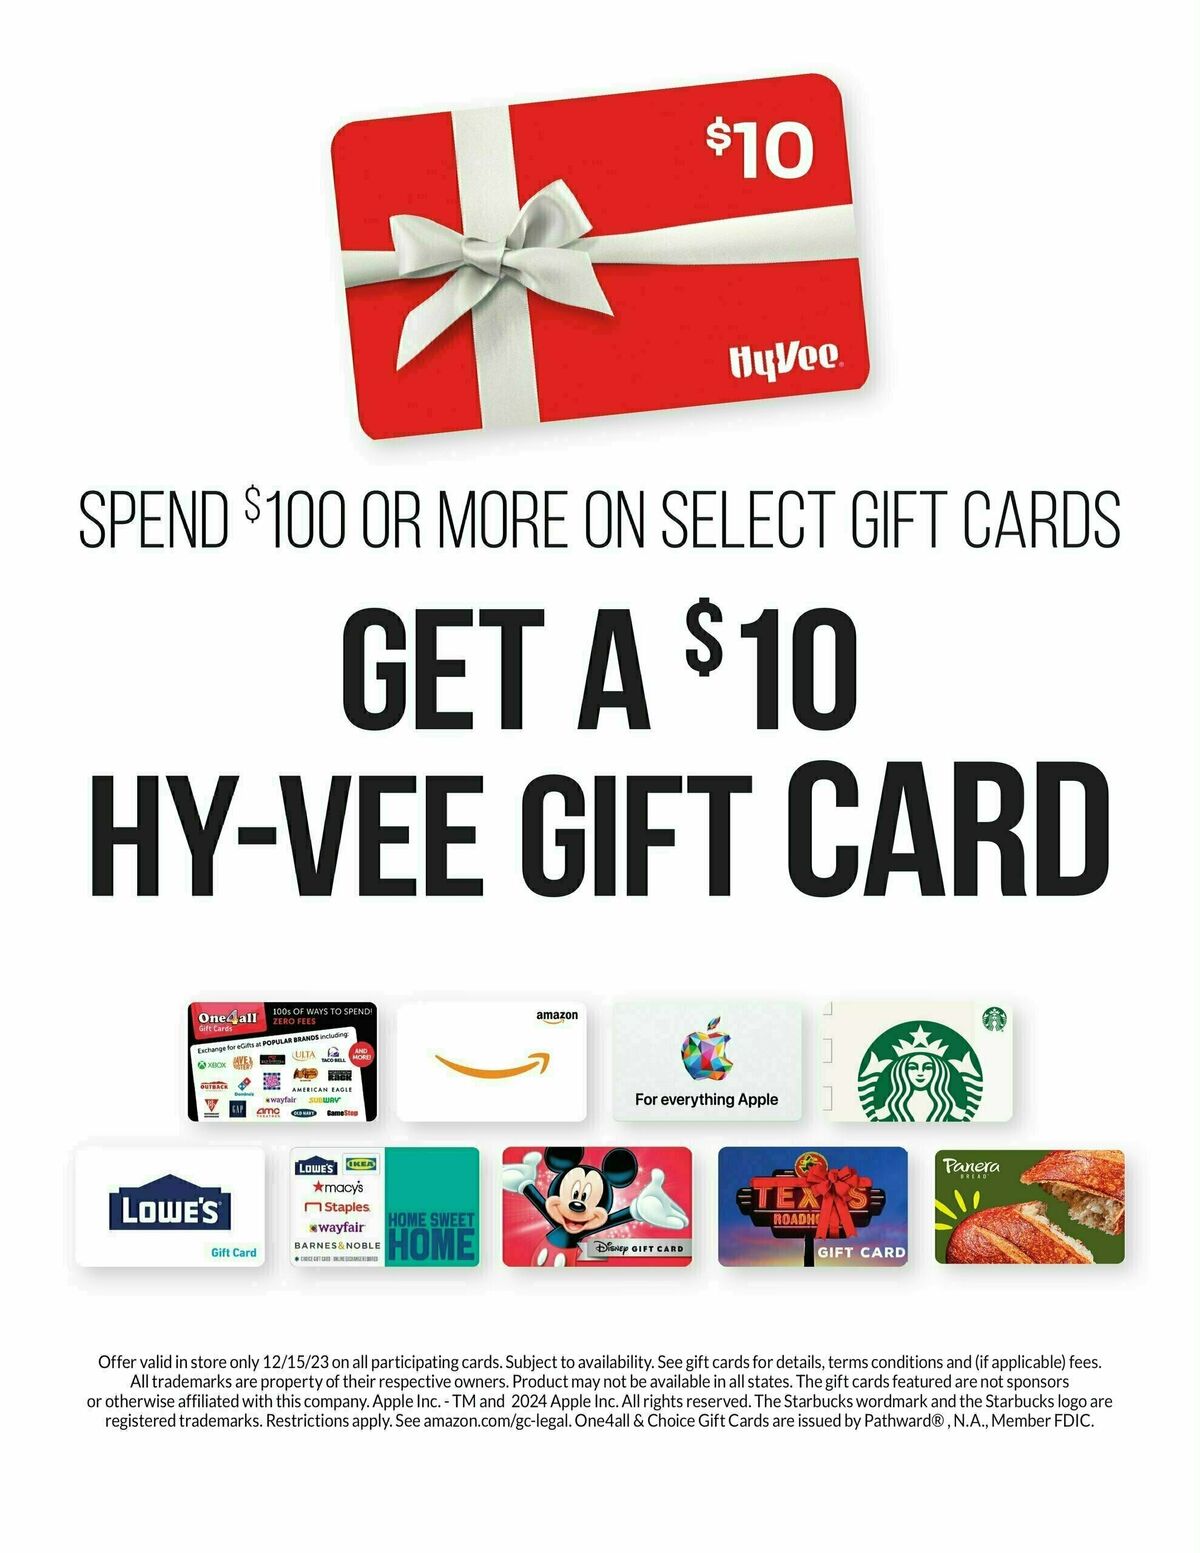 HyVee 1 Day Sale Deals & Ads from December 15